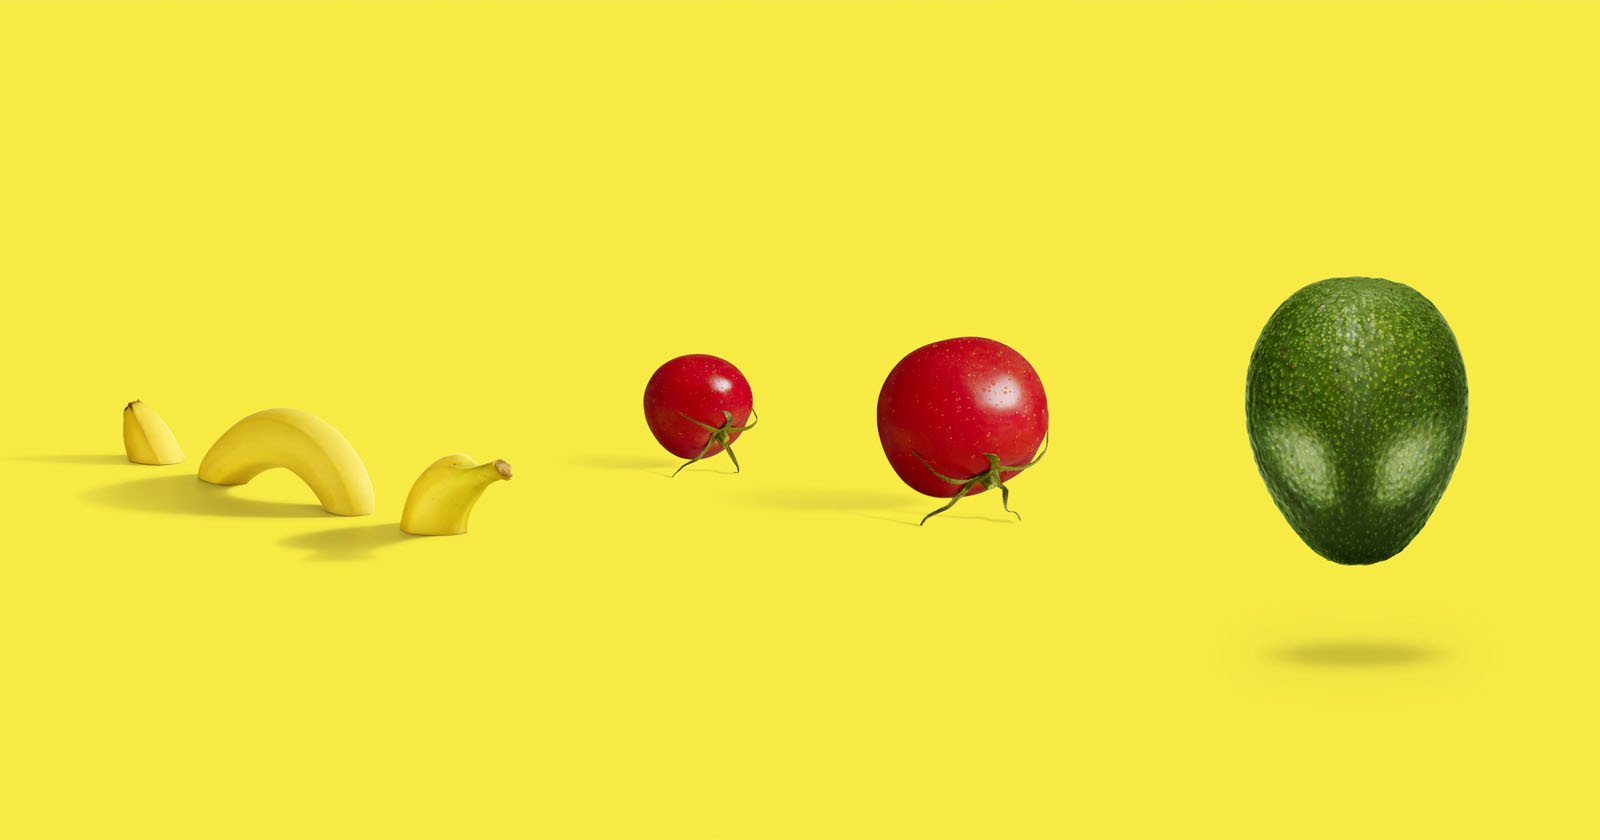 Creatively Simple Abstract Photos Made with Food